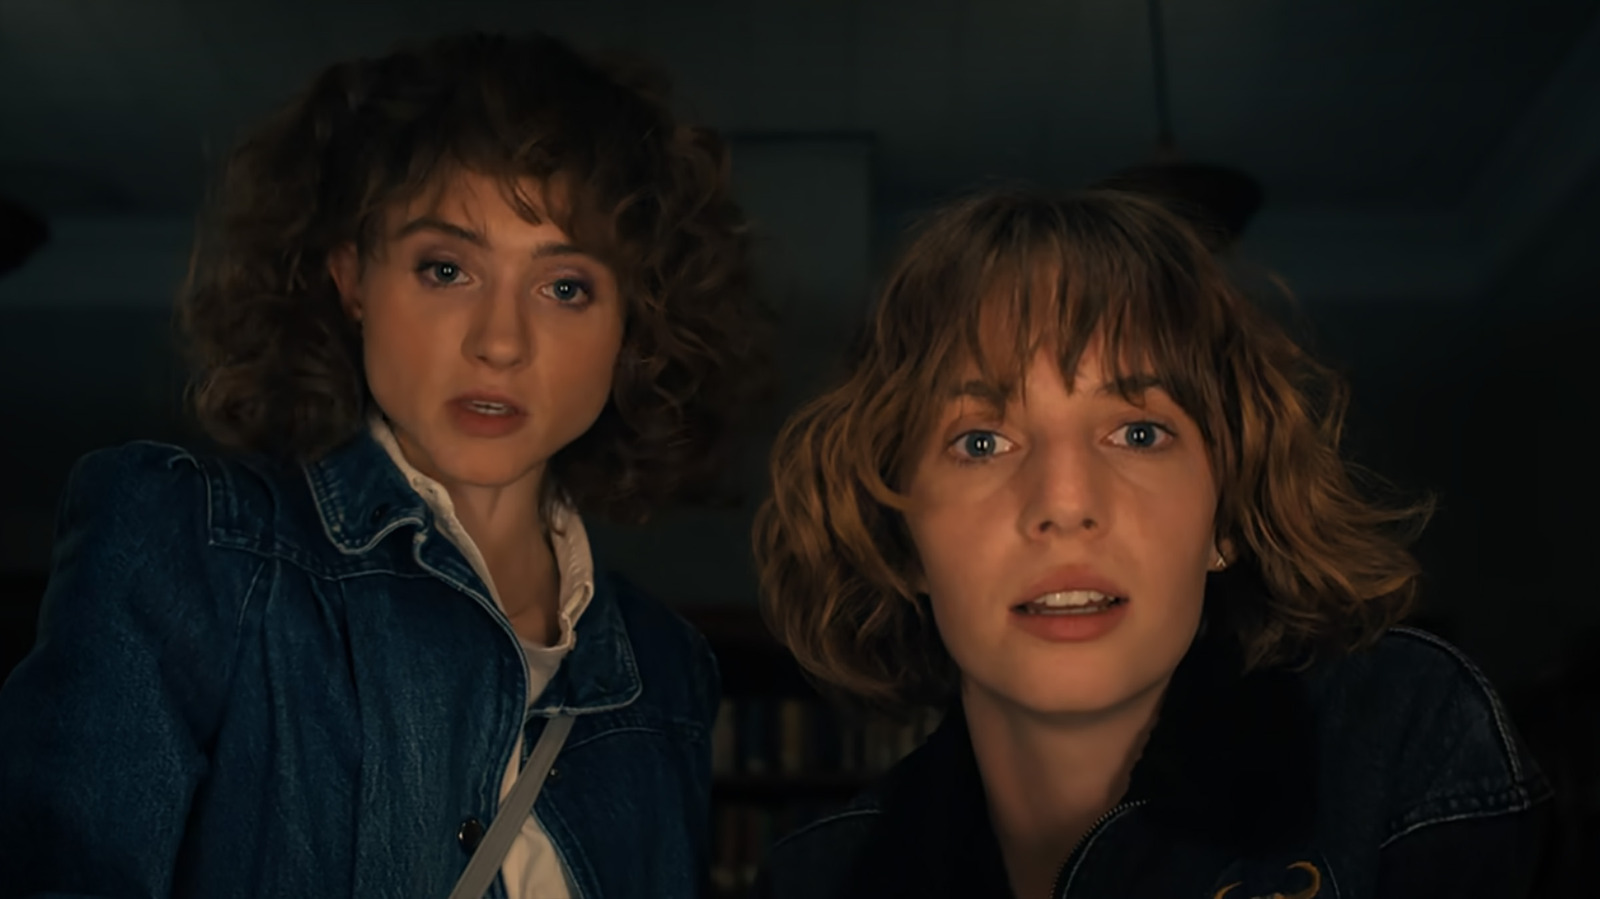 Stranger Things] In episode 3, after the party, Nancy calls Barb's mom and  asks if Barb made it home last night, and then lies about her being at the  library. In episode